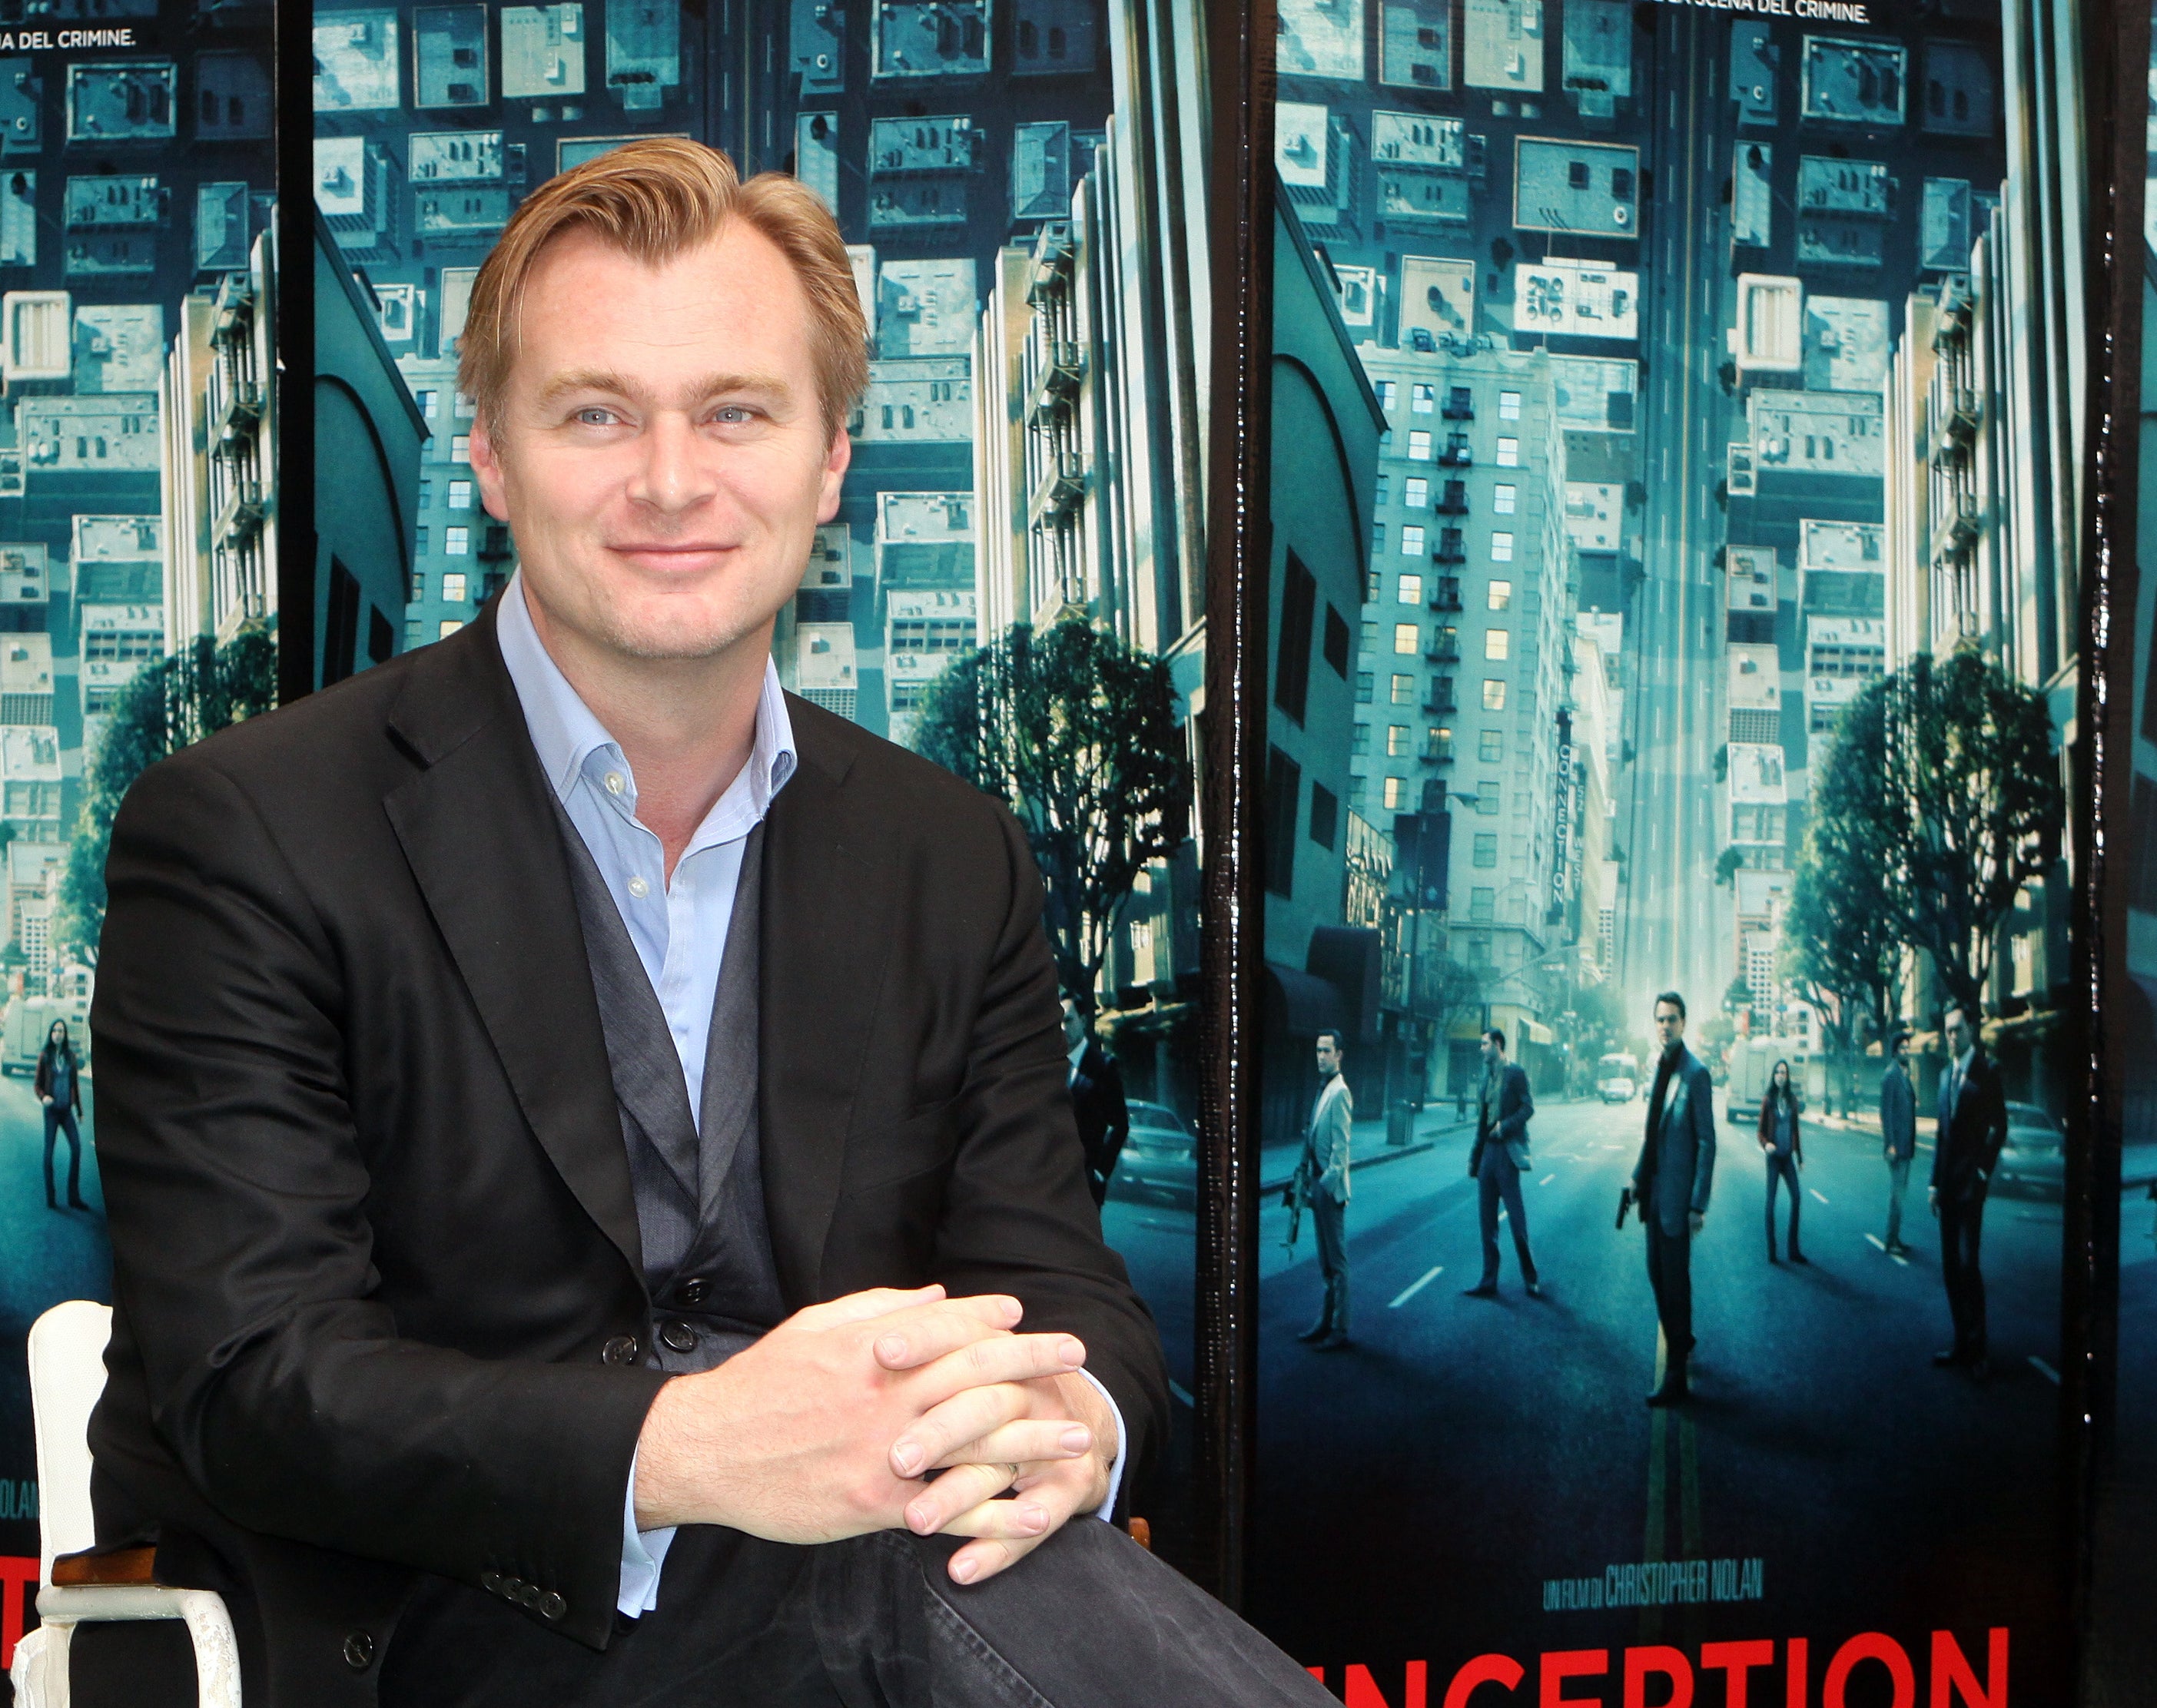 A close-up of Christopher sitting in front of the Inception movie poster